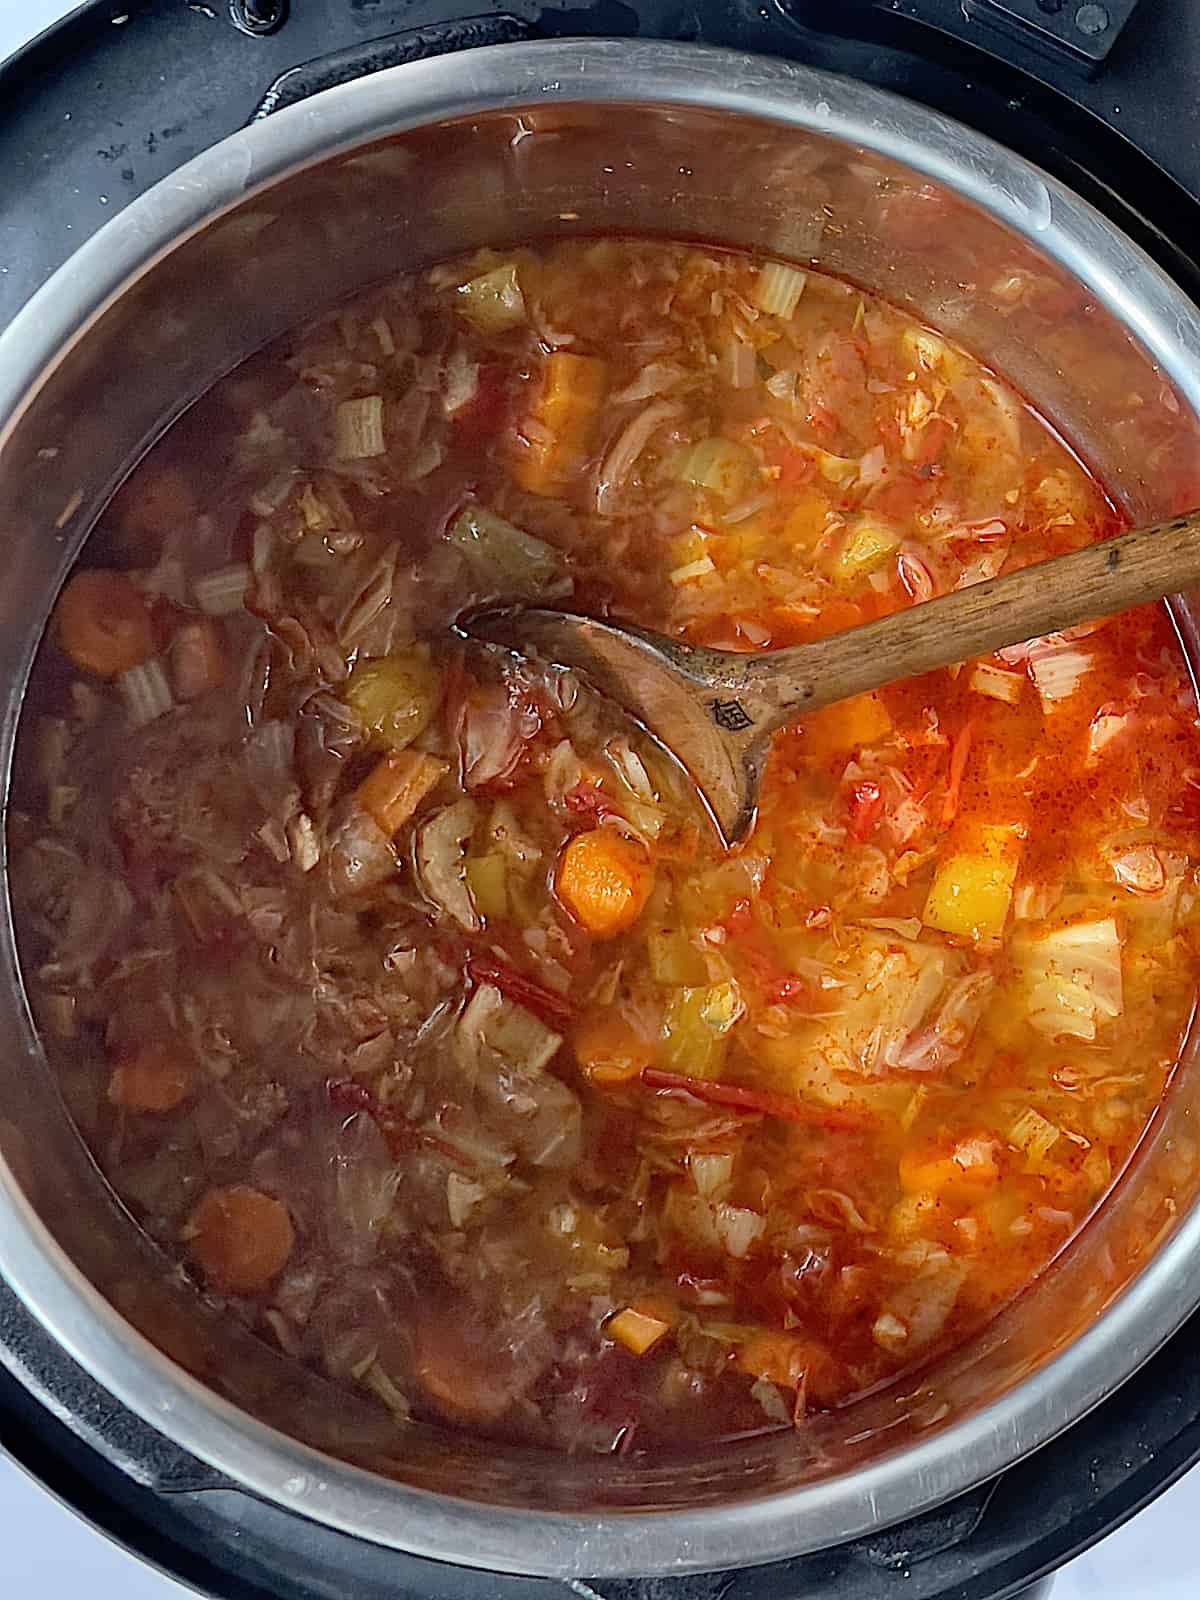 cooked instant pot cabbage soup in the inner pot mixed with a paprika roux